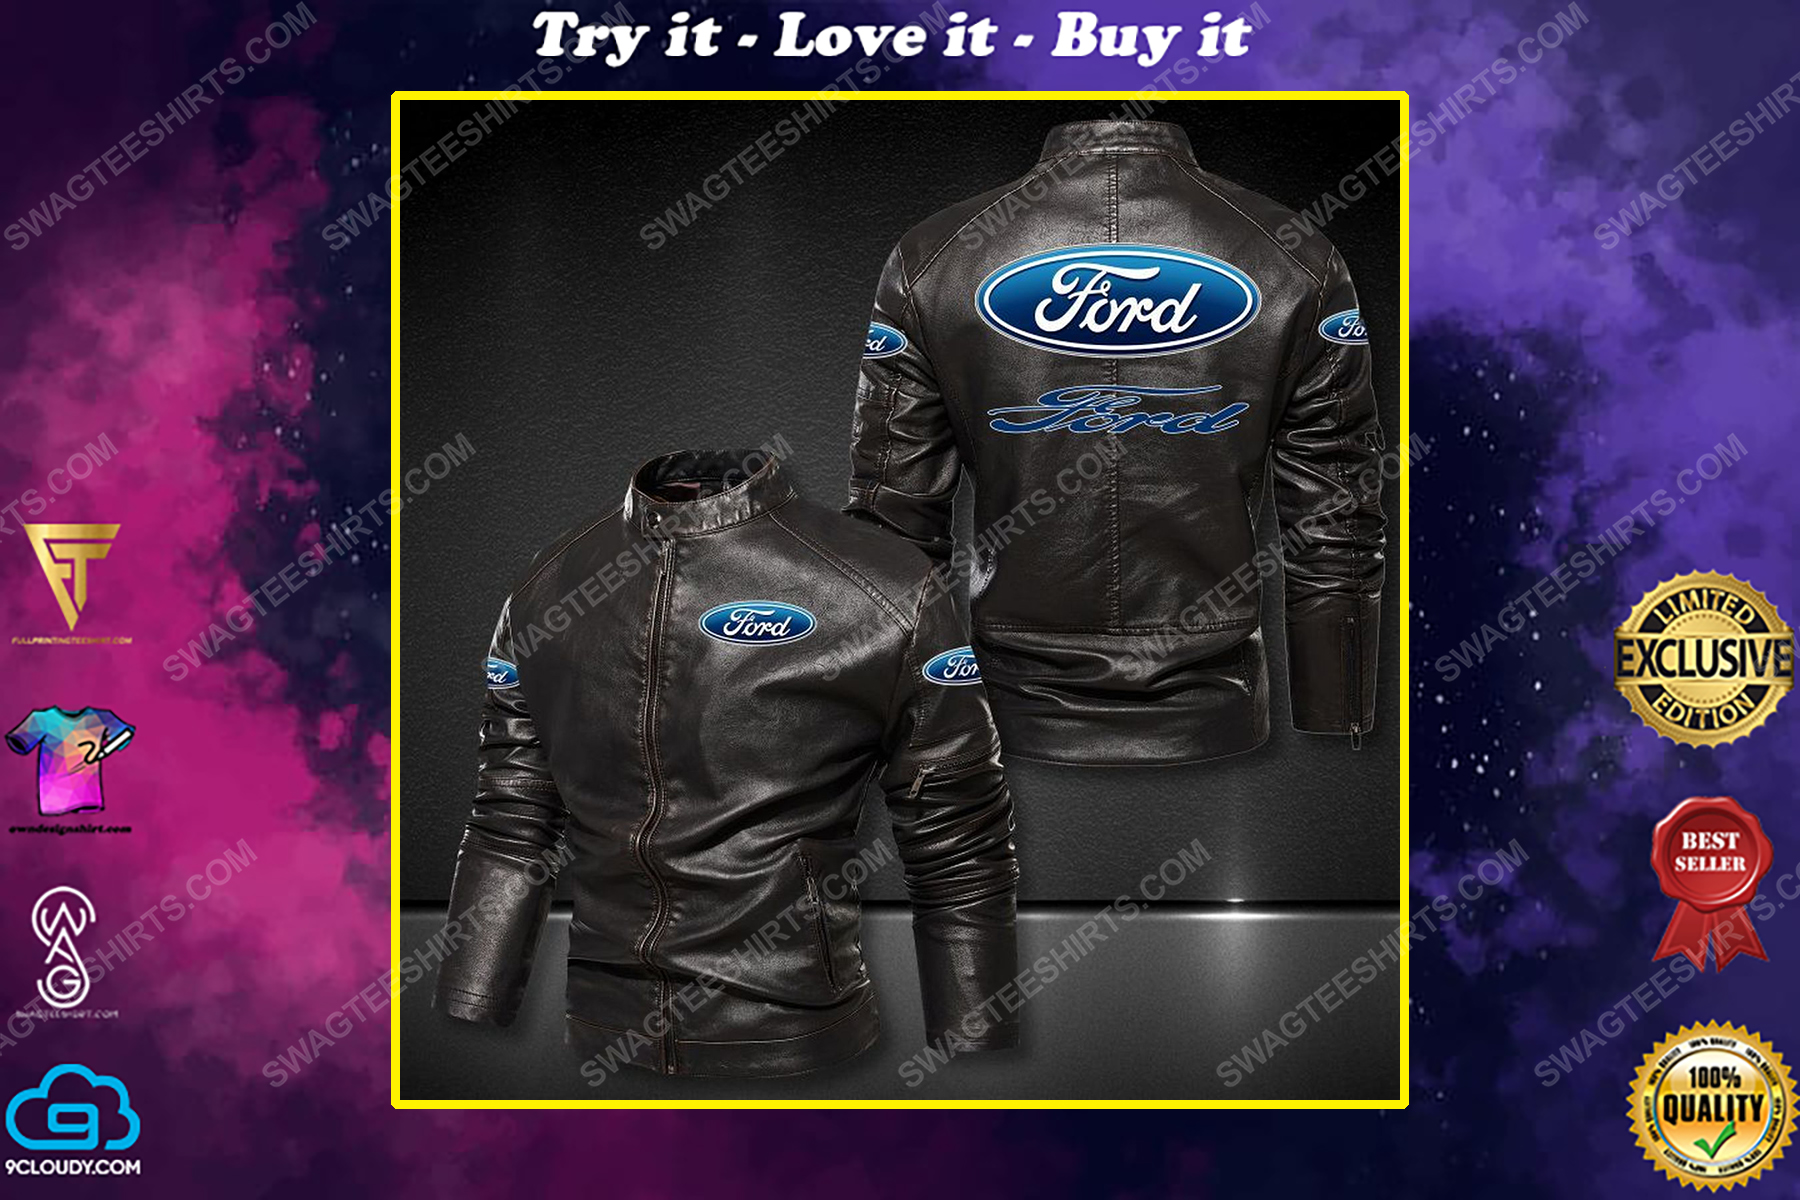 Ford motor company leather jacket